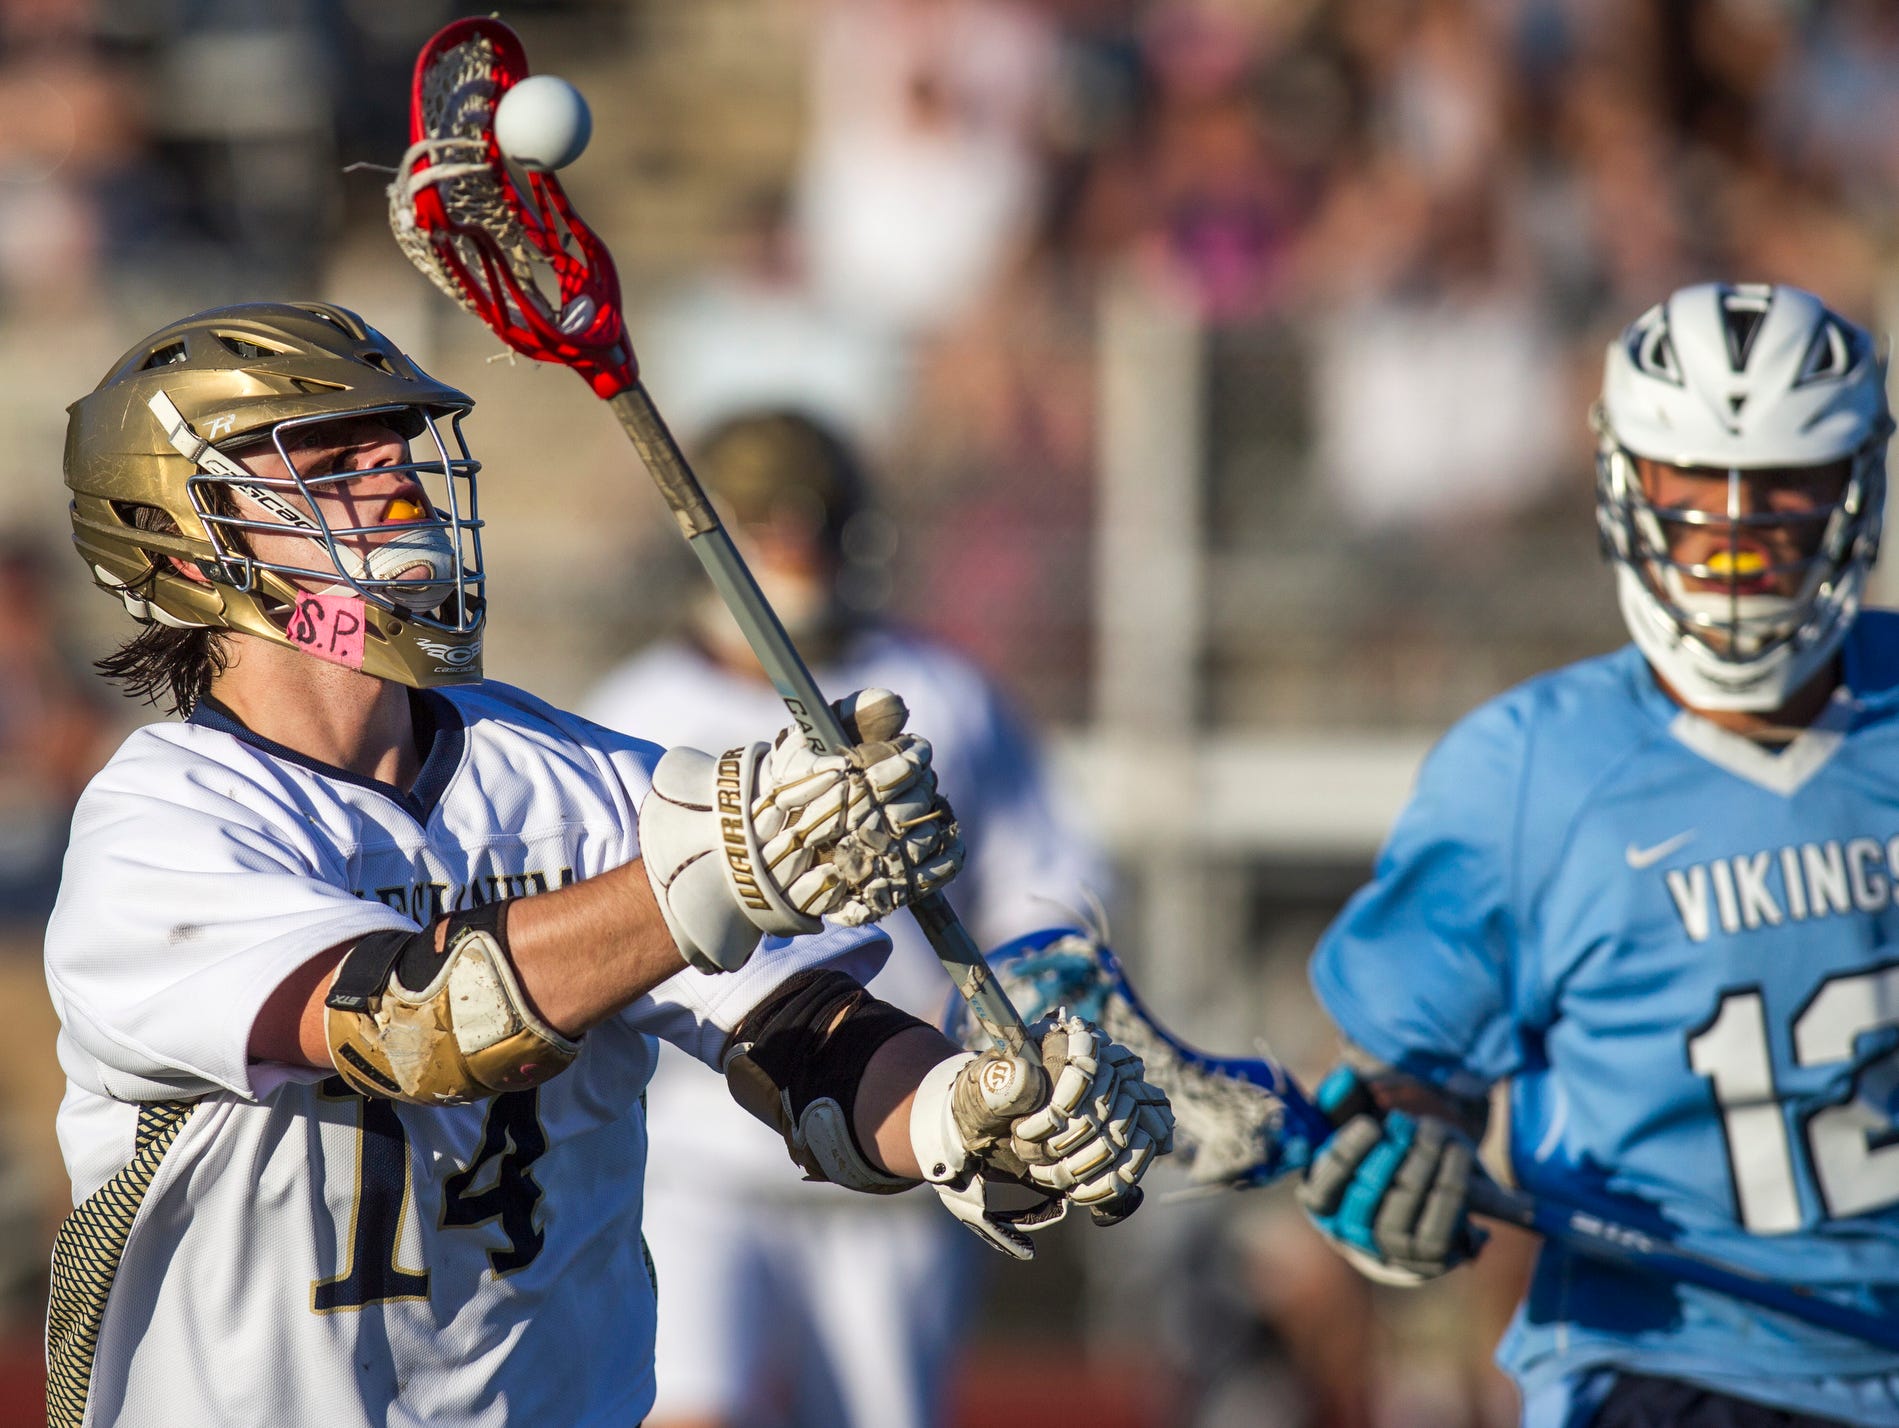 Salesianum’s Terrence Logue sends a pass downfield in the first half of the DIAA Boys Lacrosse Tournament championship game at Caravel Academy on Saturday night. Salesianum defeated Cape Henlopen 16-5.